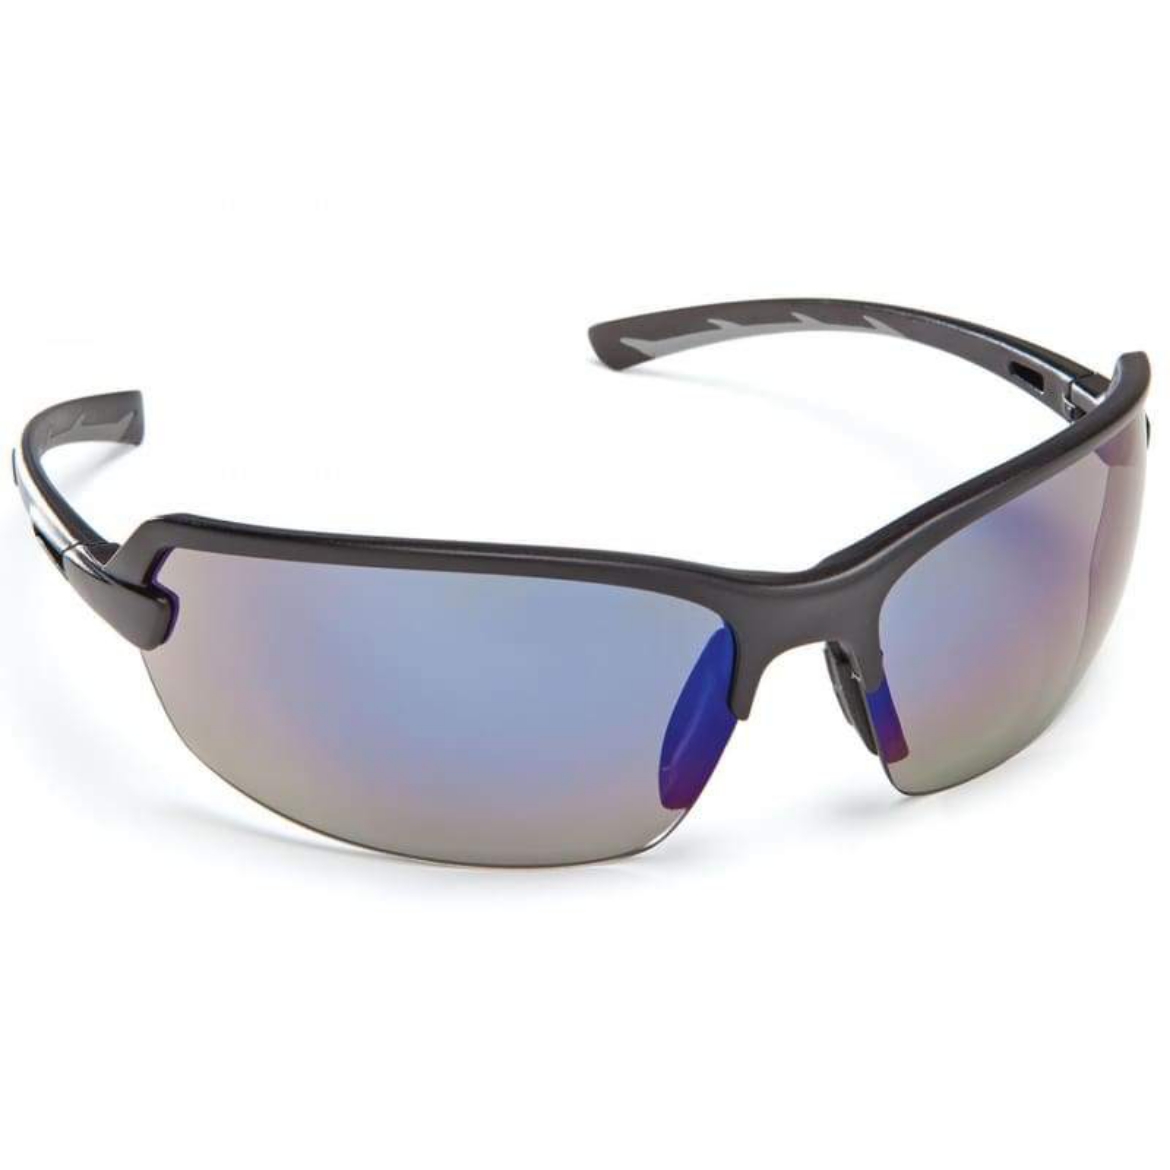 Picture of Force360 Horizon Blue Mirror Lens Safety Glasses